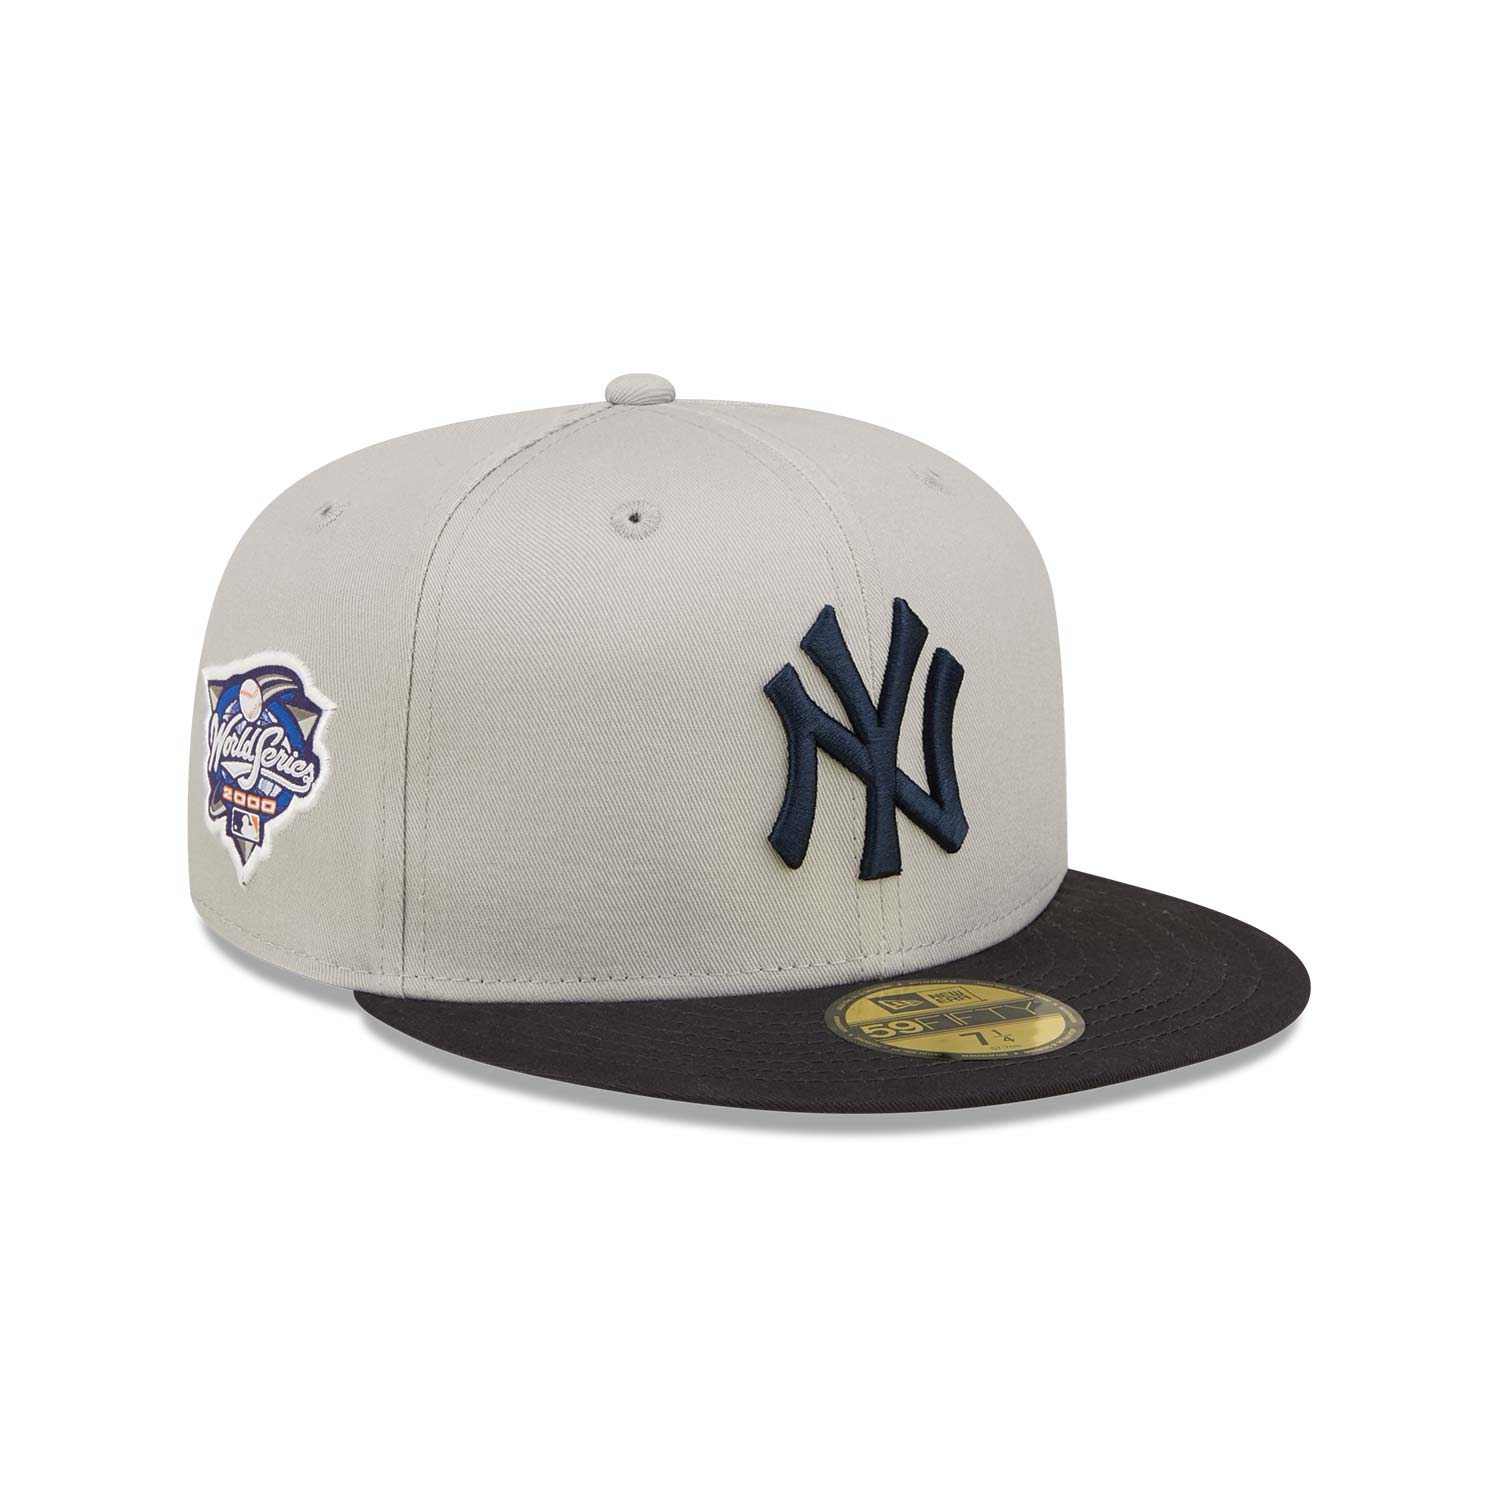 New York Yankees New Era Team Logo 59FIFTY Fitted Hat - Black